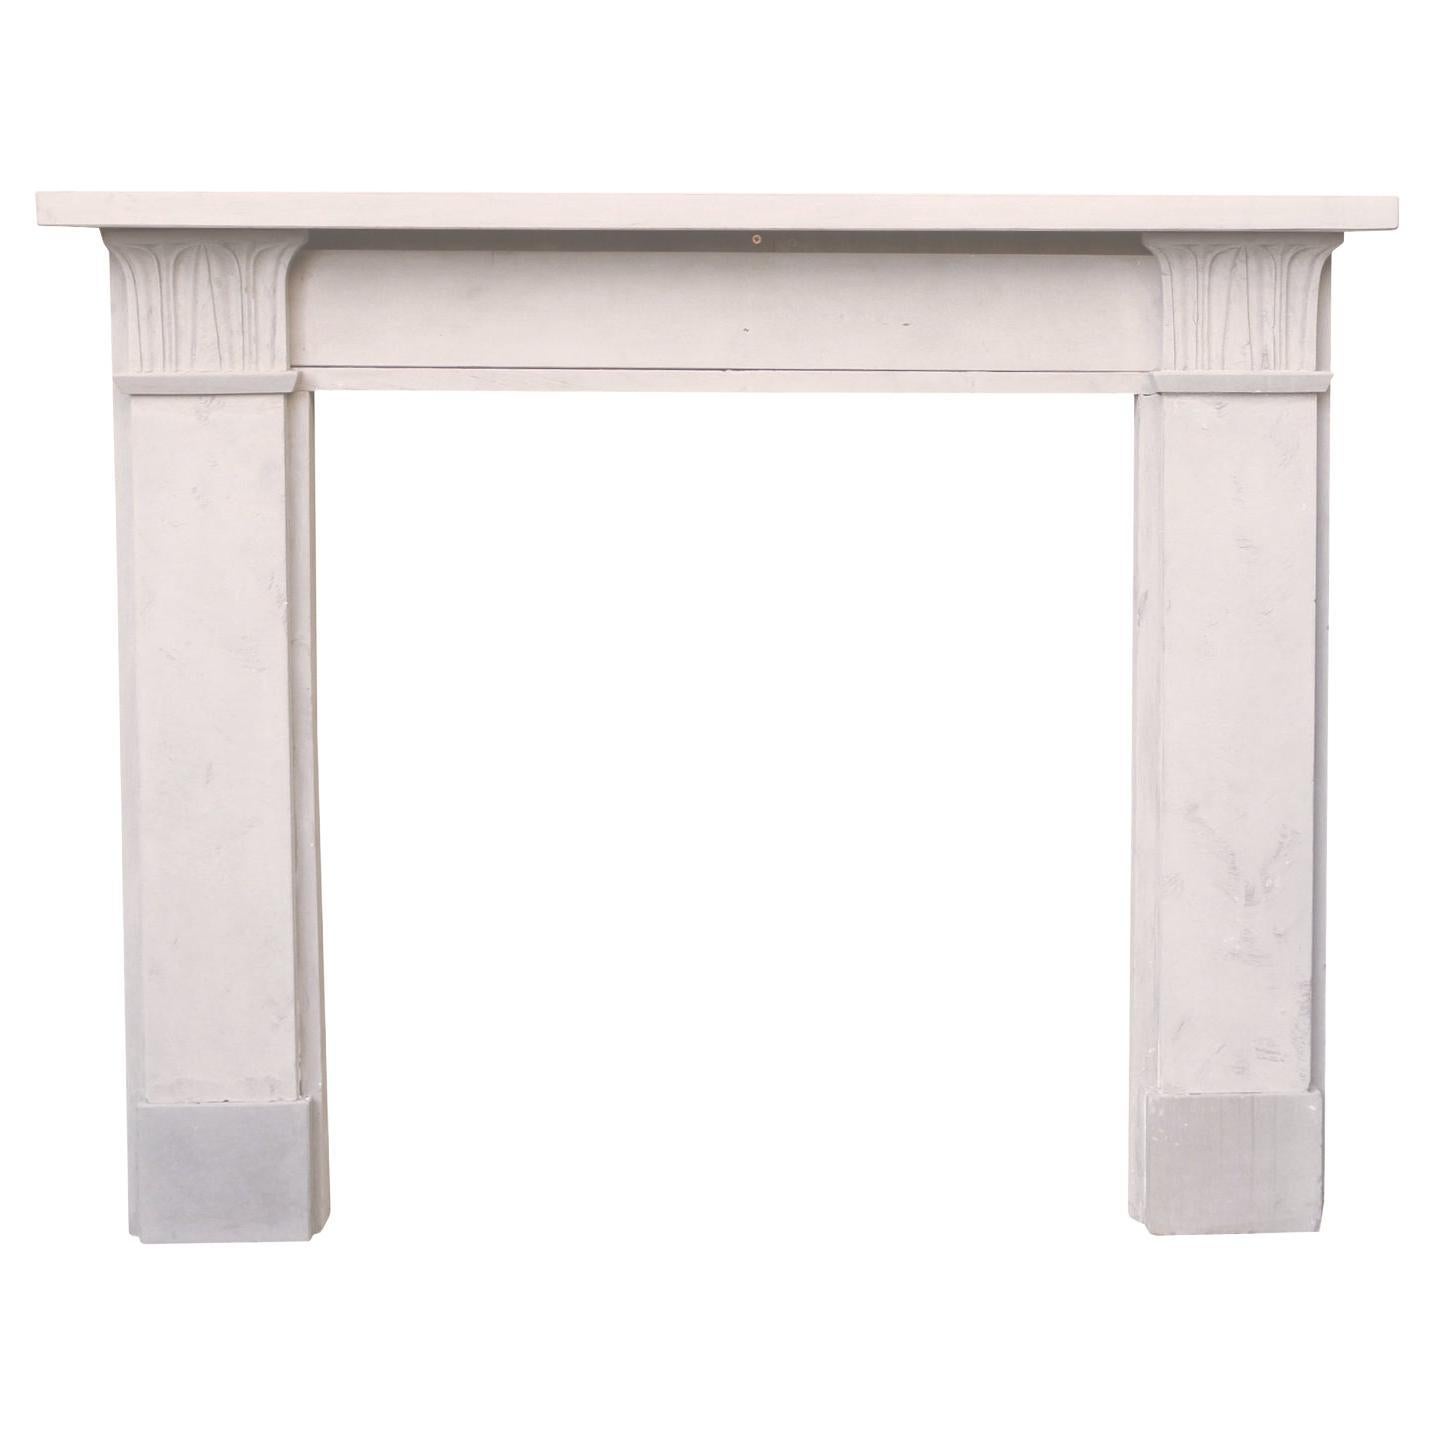 Reclaimed Pale Stone Fire Mantel For Sale